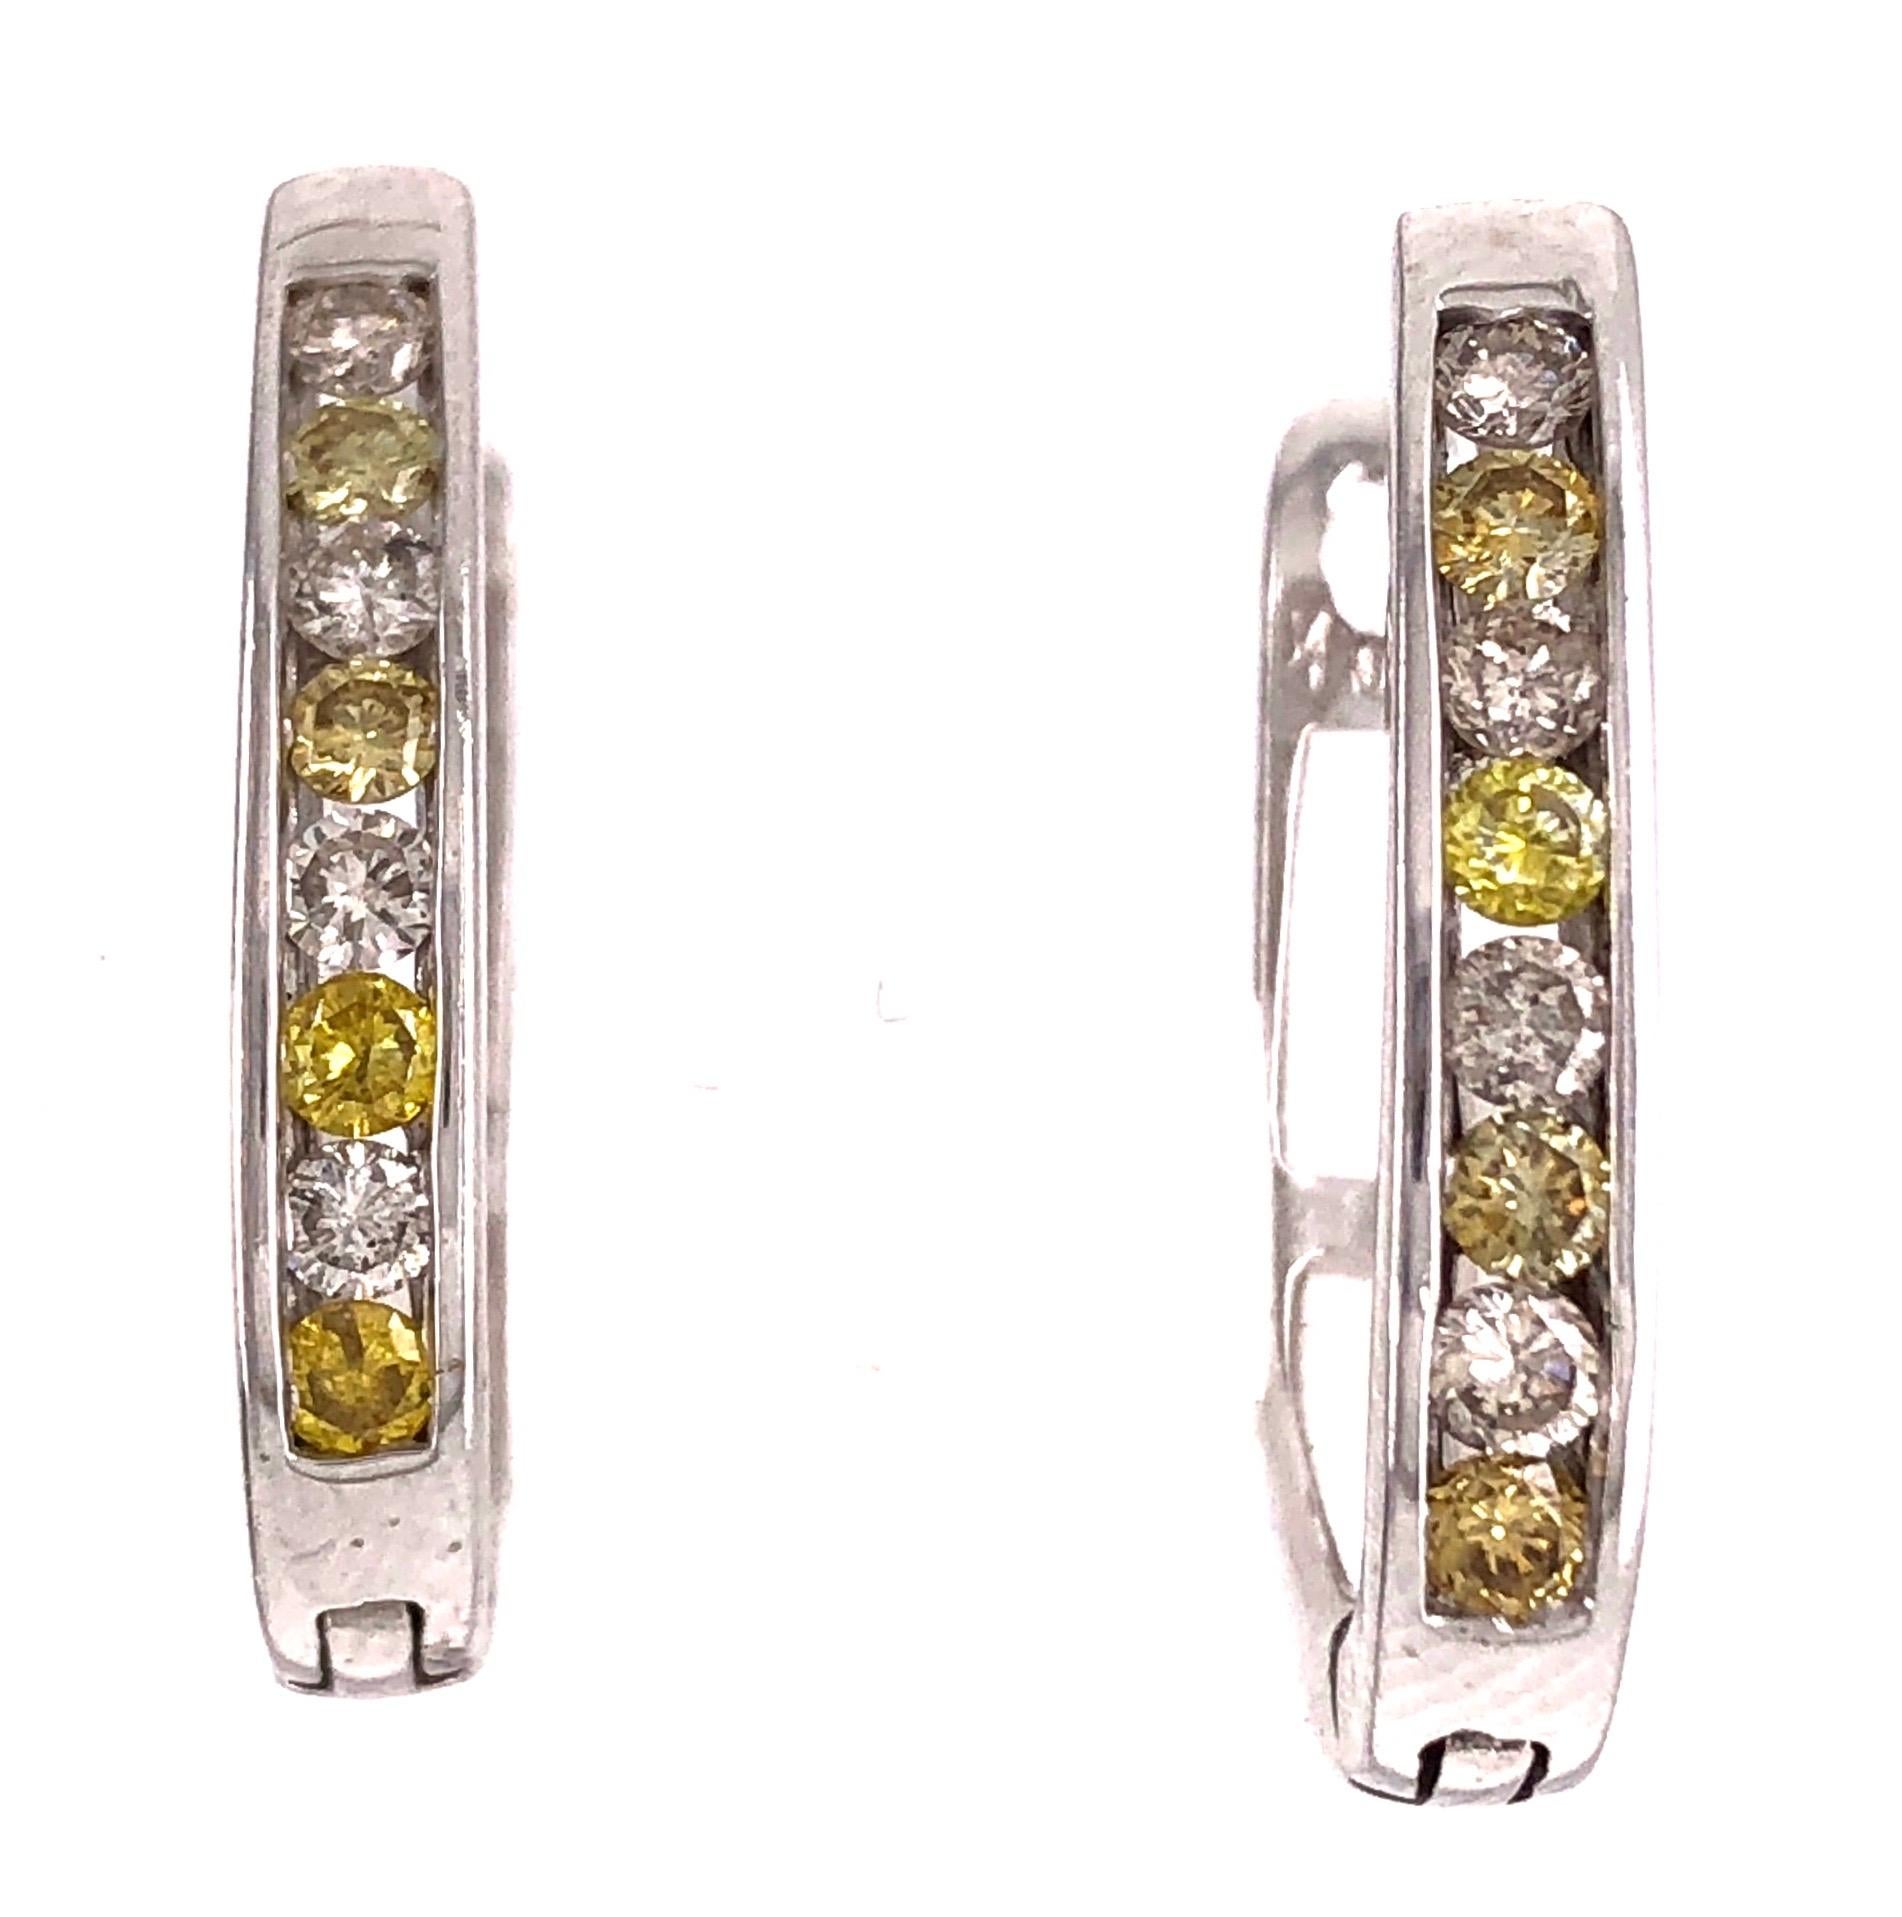 Latch Back Earrings with White and Yellow Diamonds 4.6 grams total weight. 14Kt White Gold 16 Total Diamonds .30

